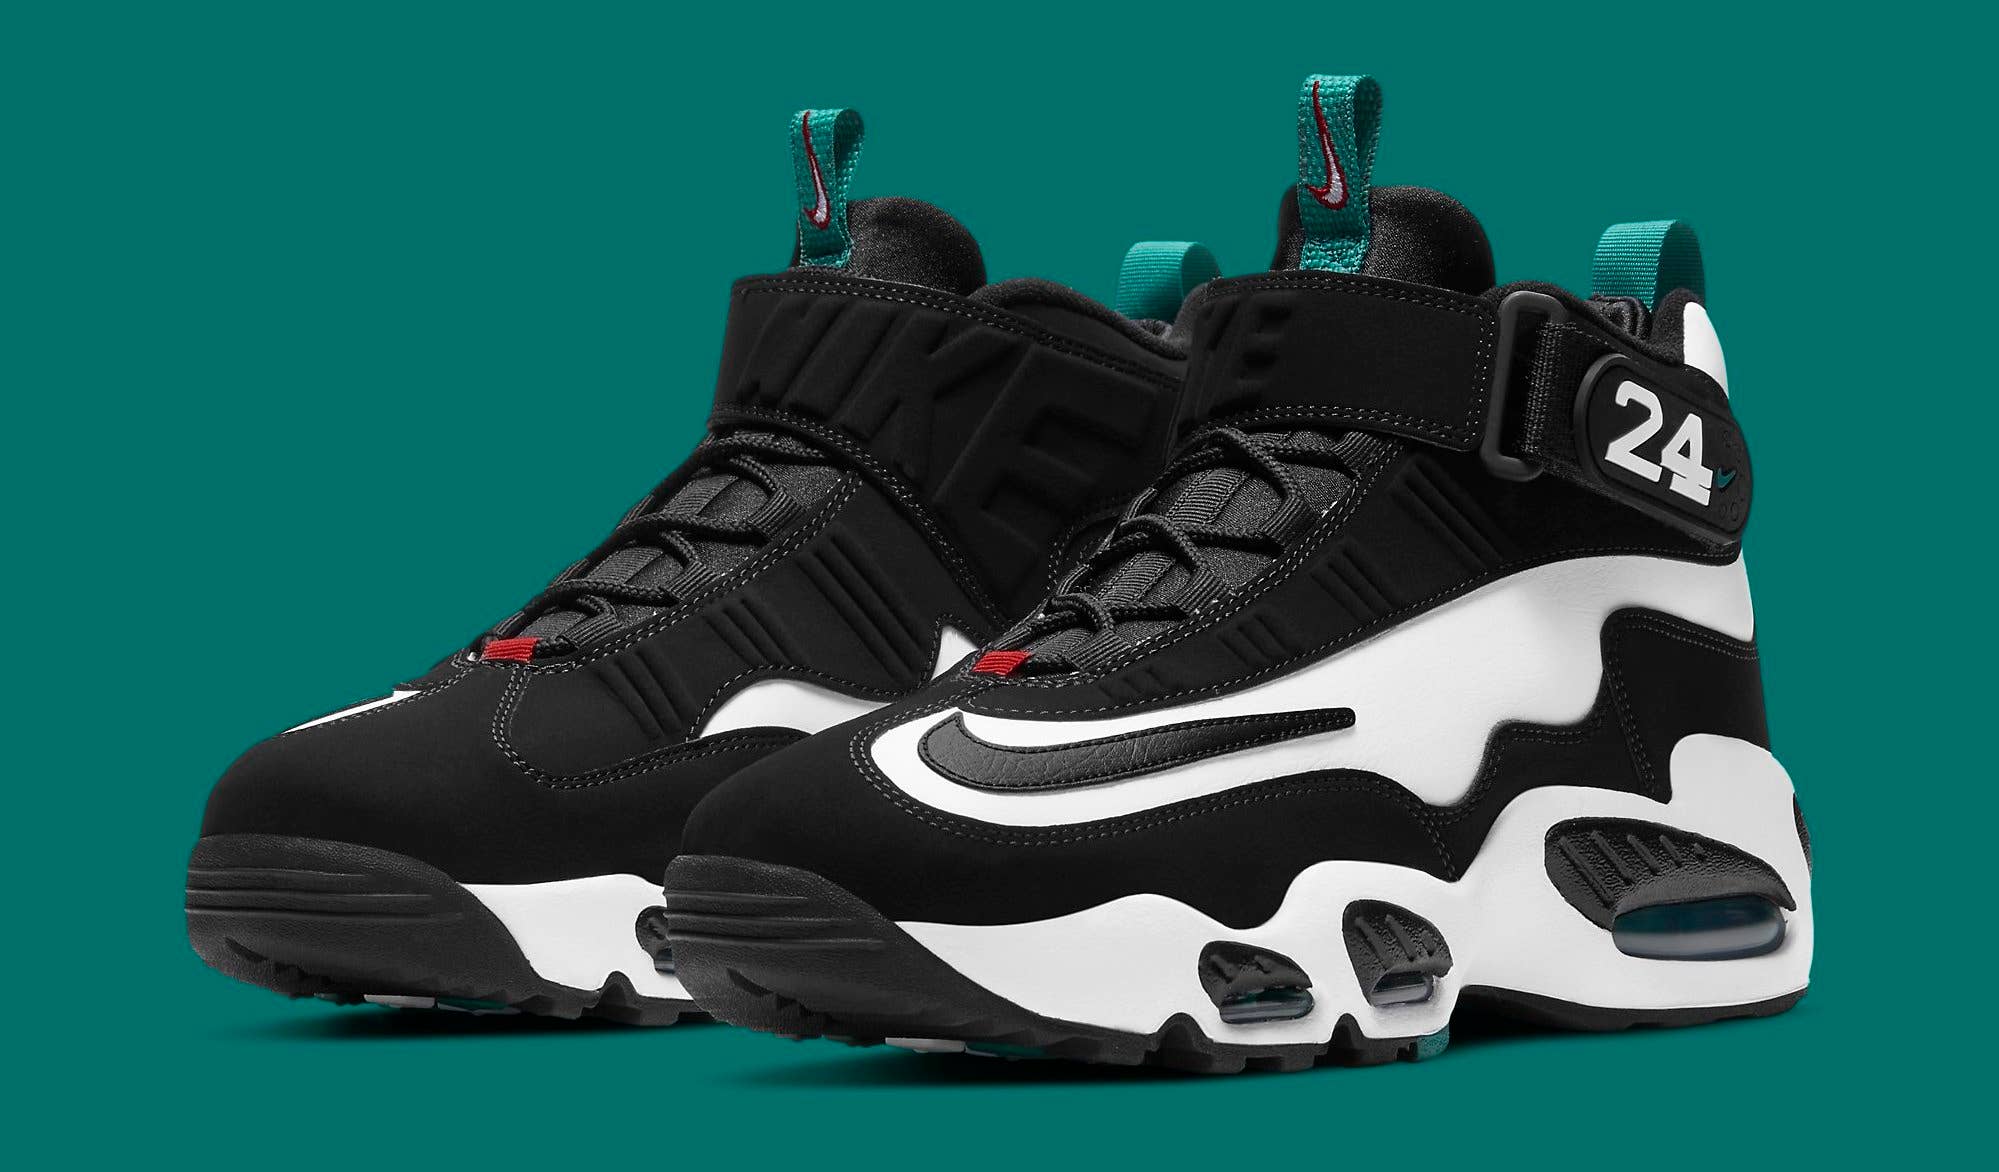 Ken Griffey Jr. Offers Look at Upcoming Nike Releases